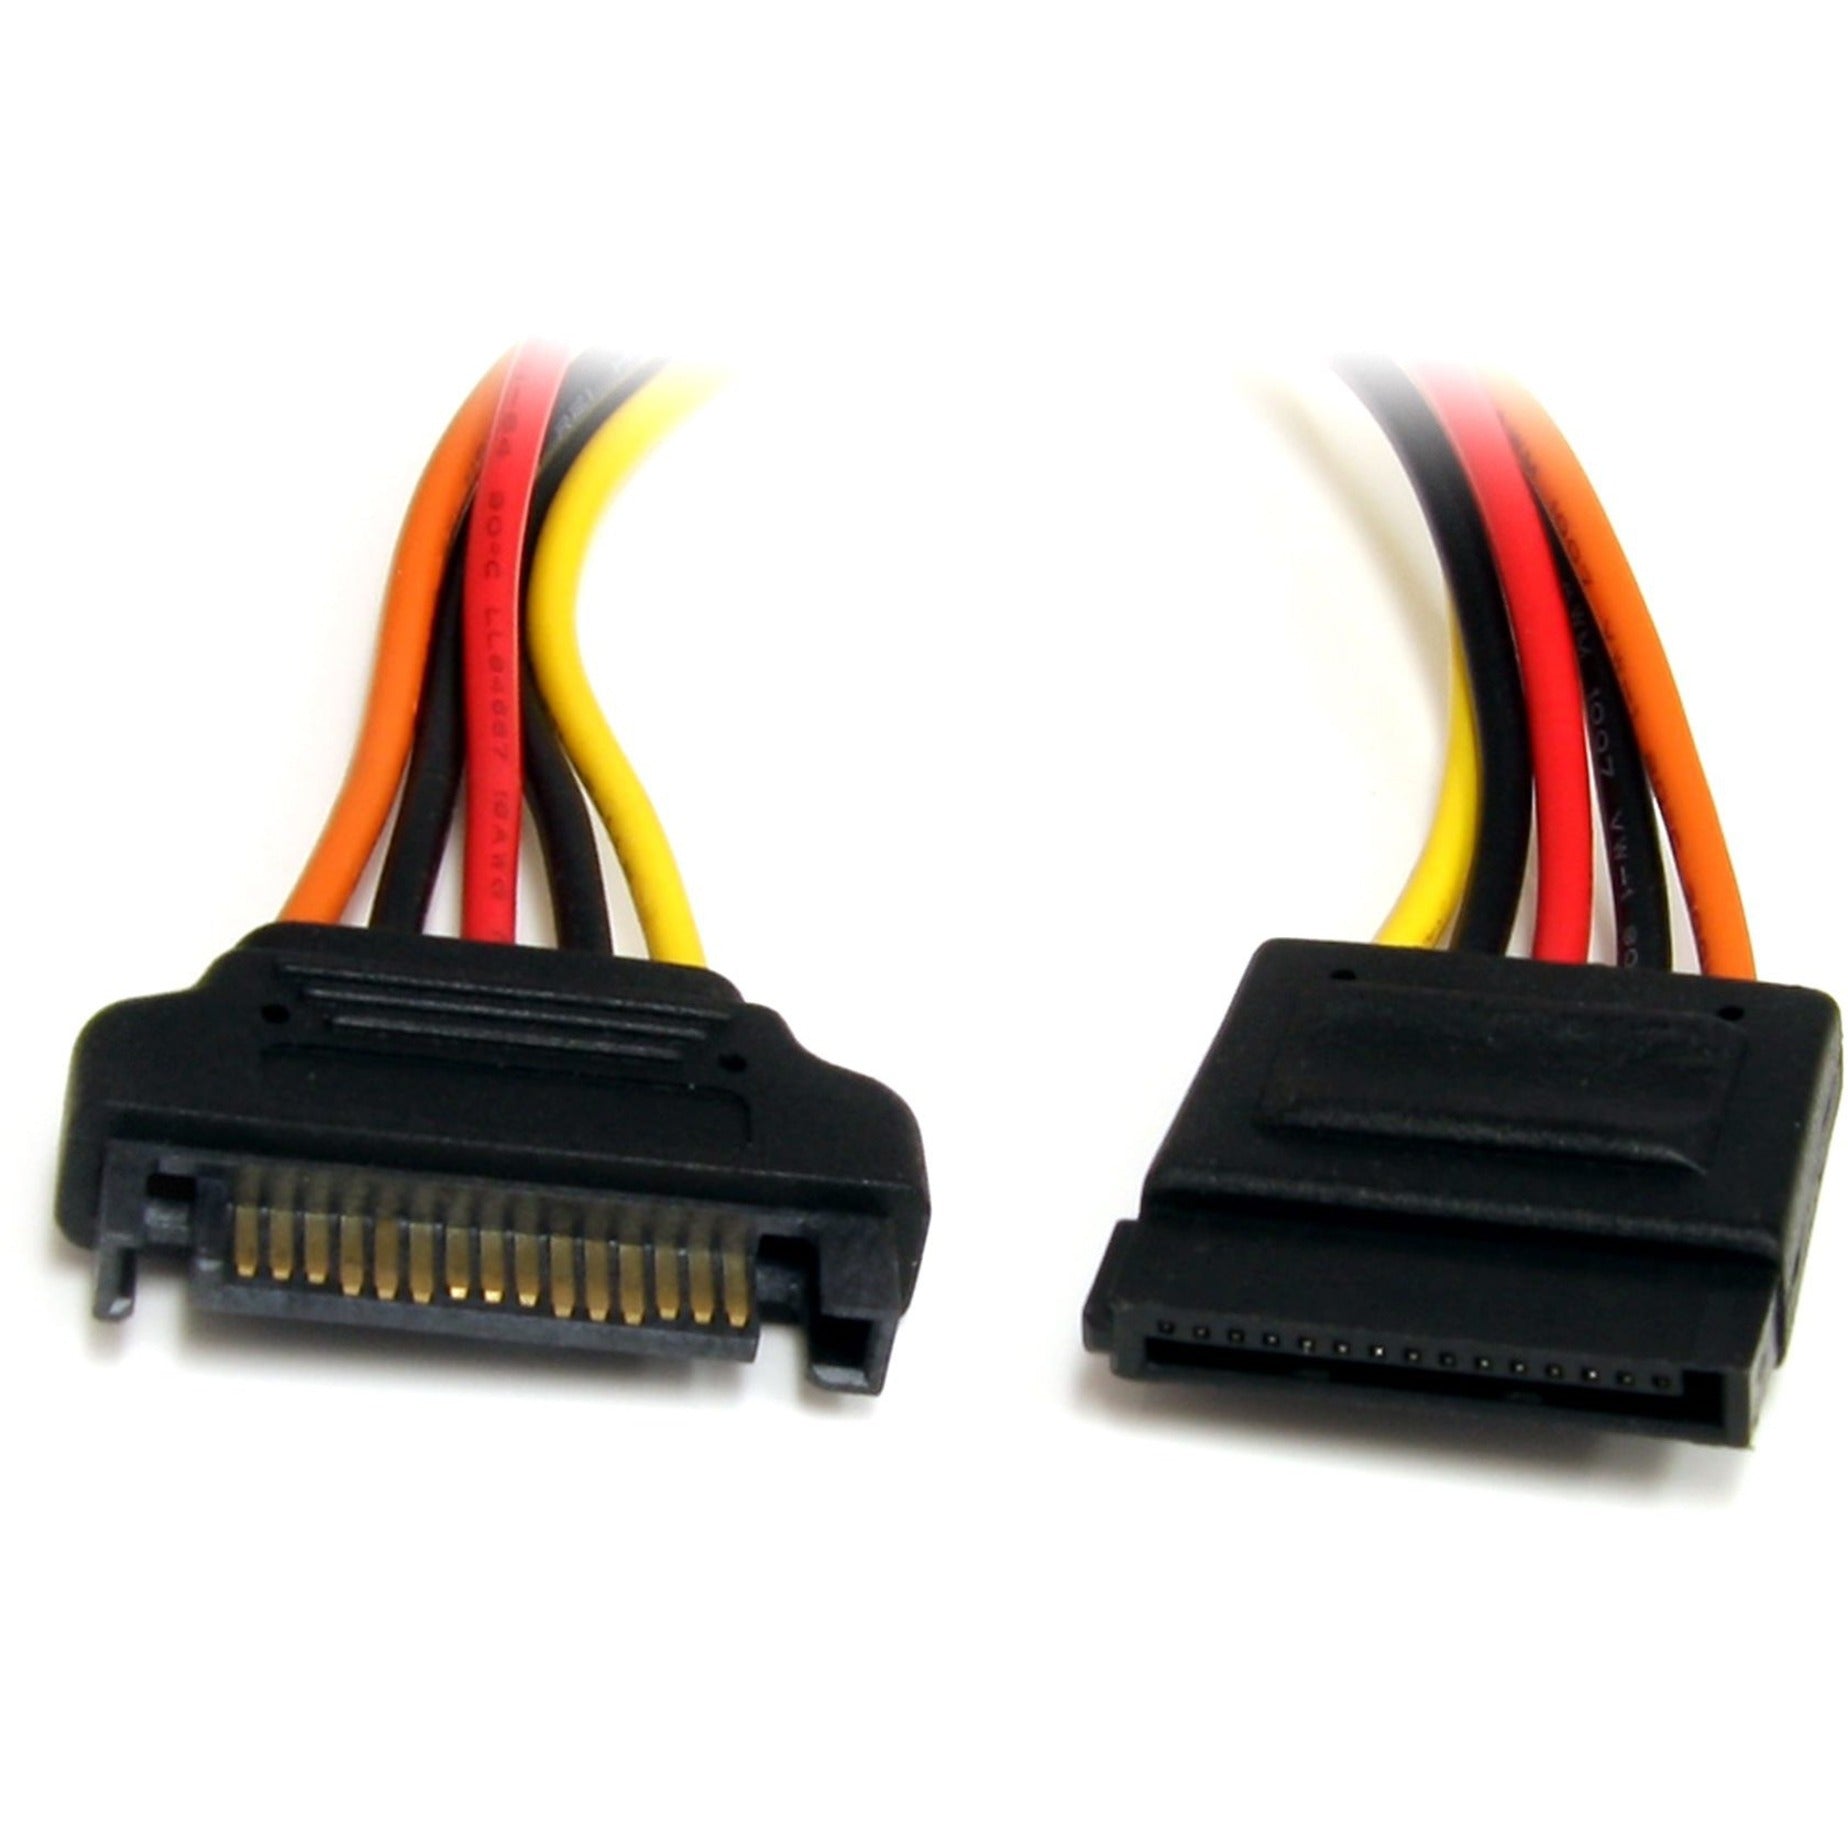 StarTech.com SATAPOWEXT12 12in 15 Pin SATA Power Extension Cable, Extend Your SATA Power Connection with Ease